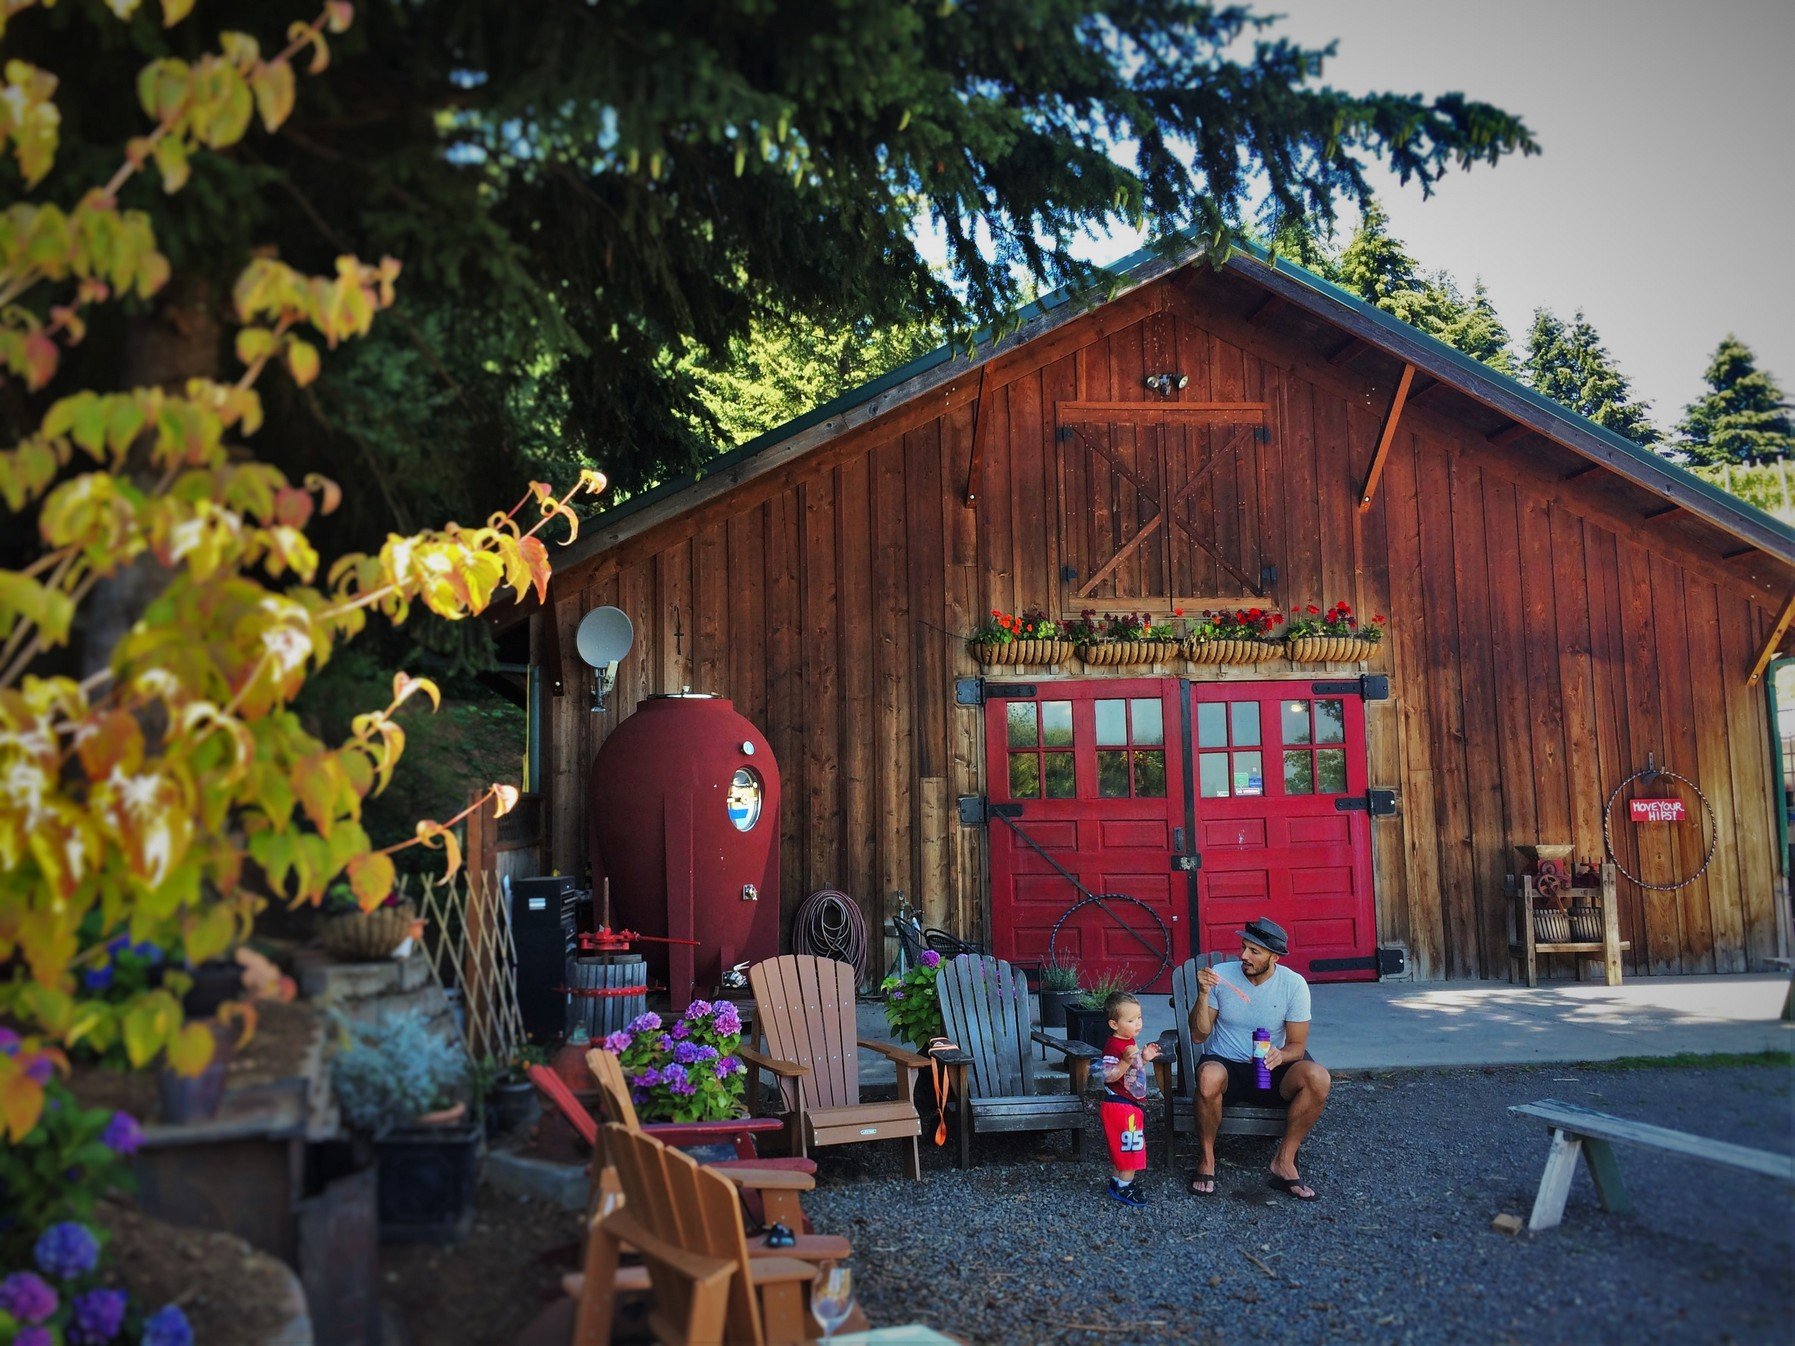 Rob-Taylor-and-TinyMan-Family-Friendly-wine-tasting-at-AniChe-Cellars-Underwood-Columbia-River-Gorge-2.jpg